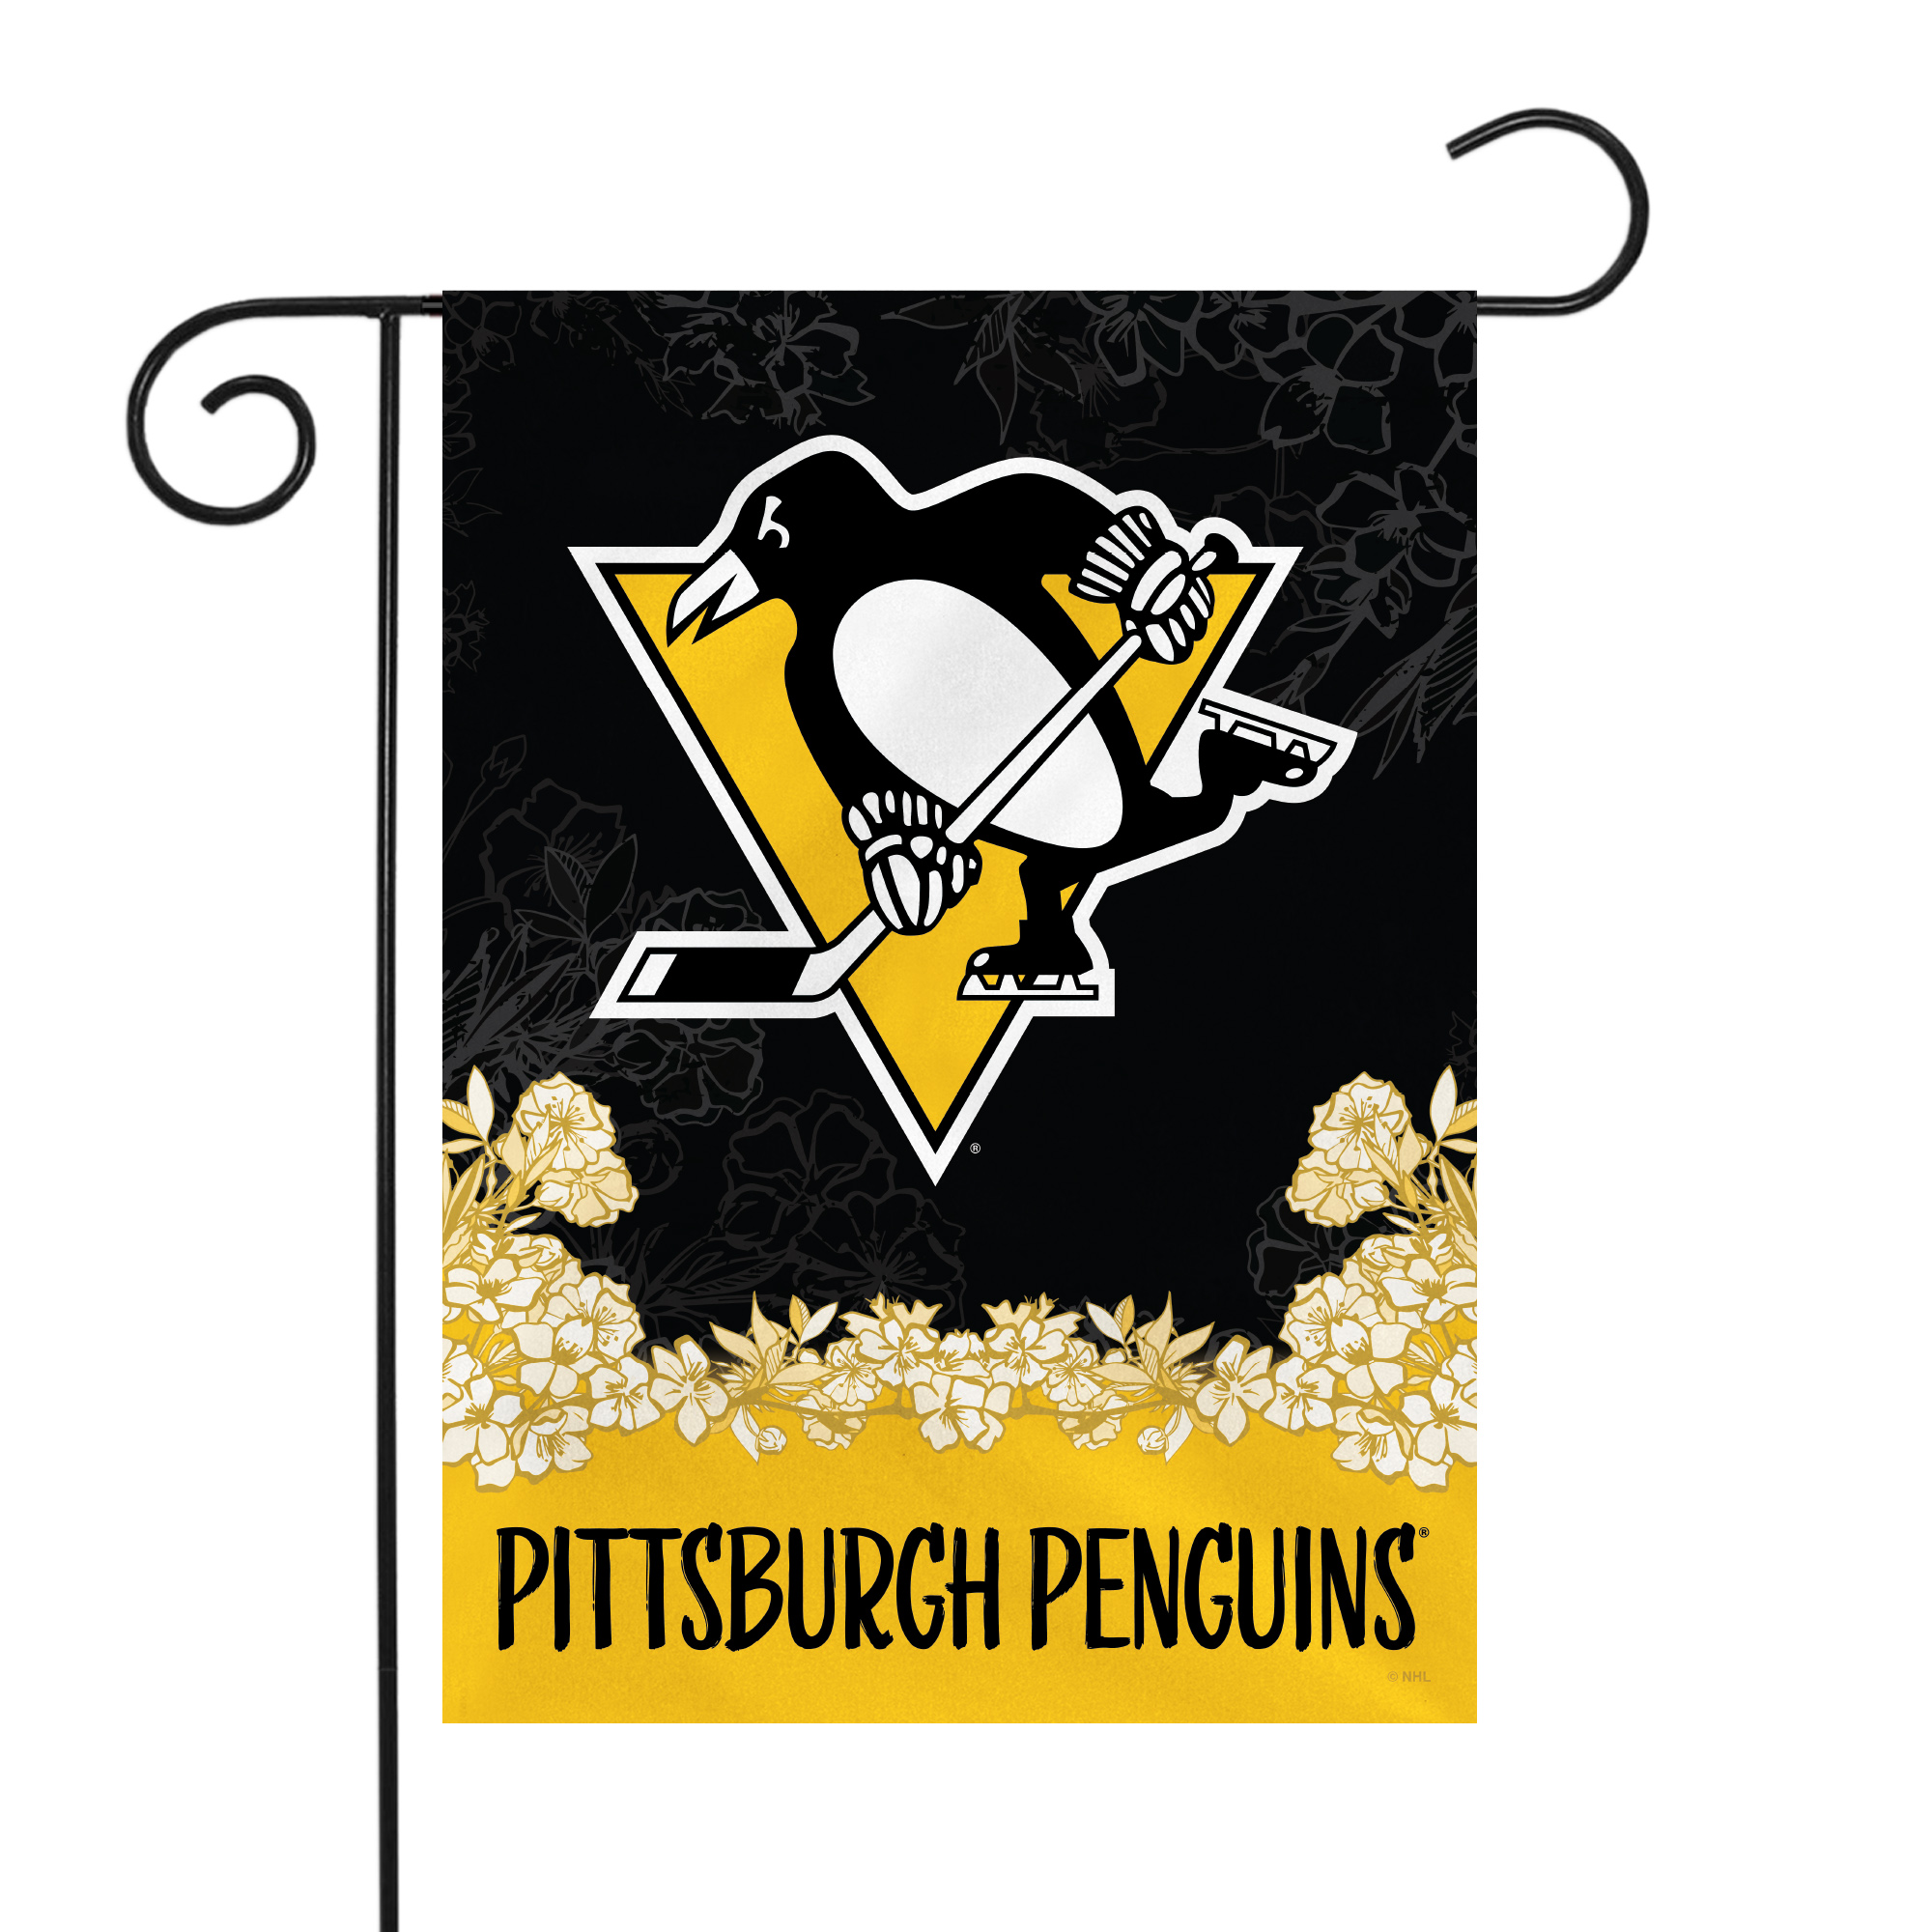 Rico NHL Hockey Pittsburgh Penguins Primary Double Sided Garden Flag